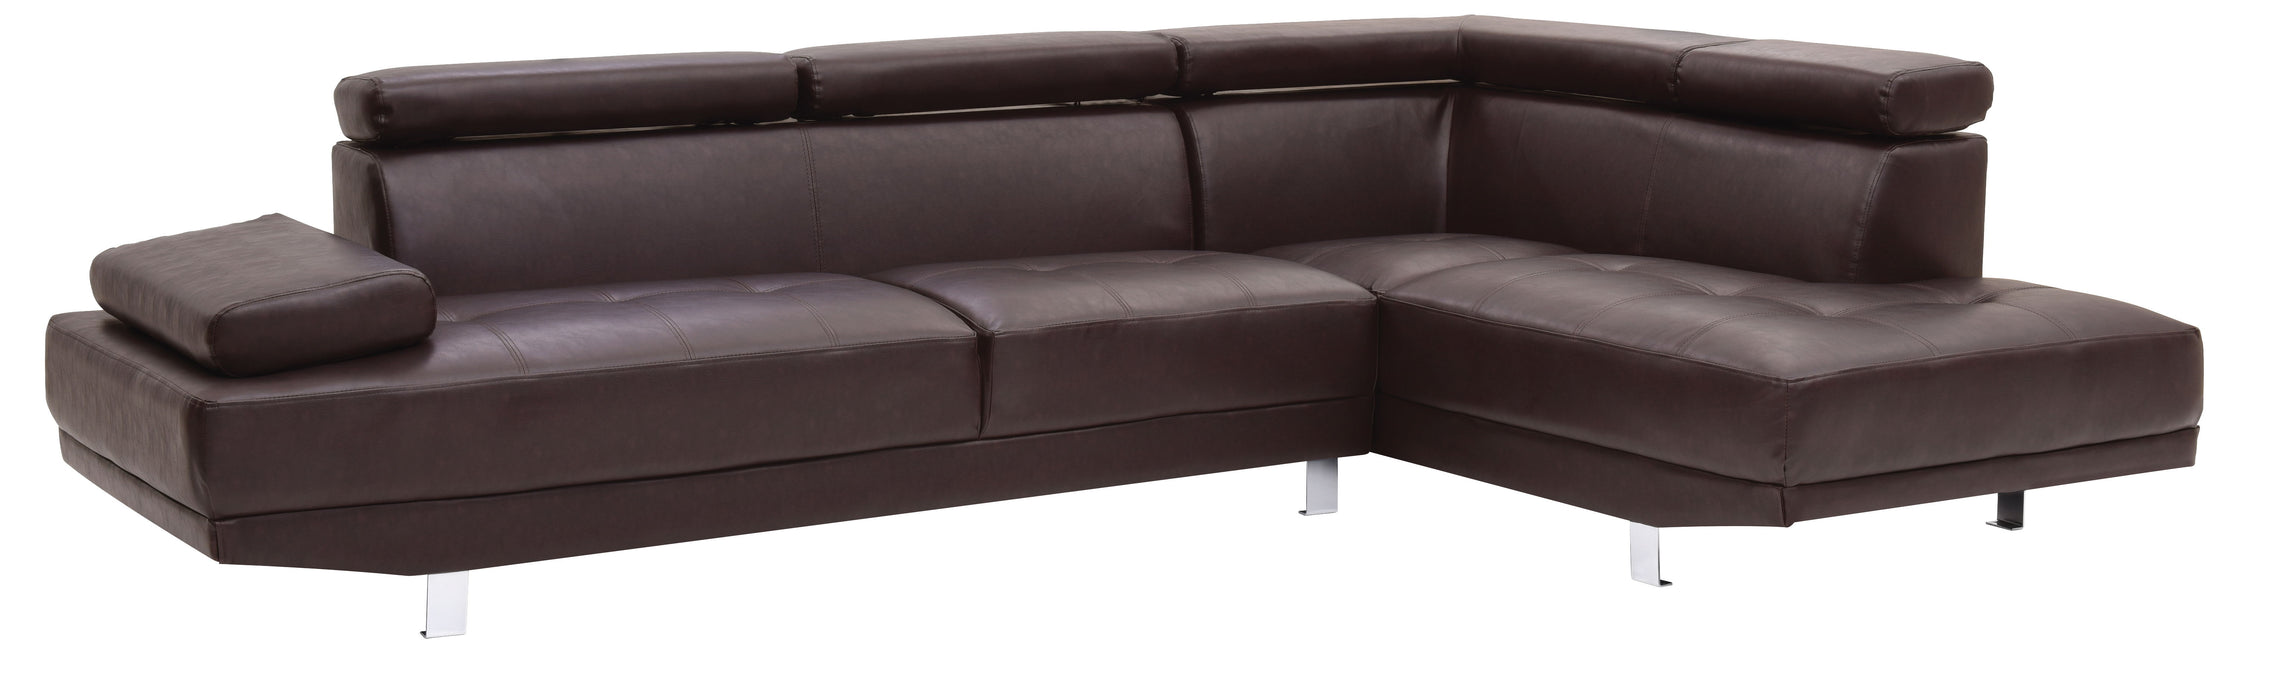 Riveredge - G455-SC Sectional (2 Boxes) - Dark Brown